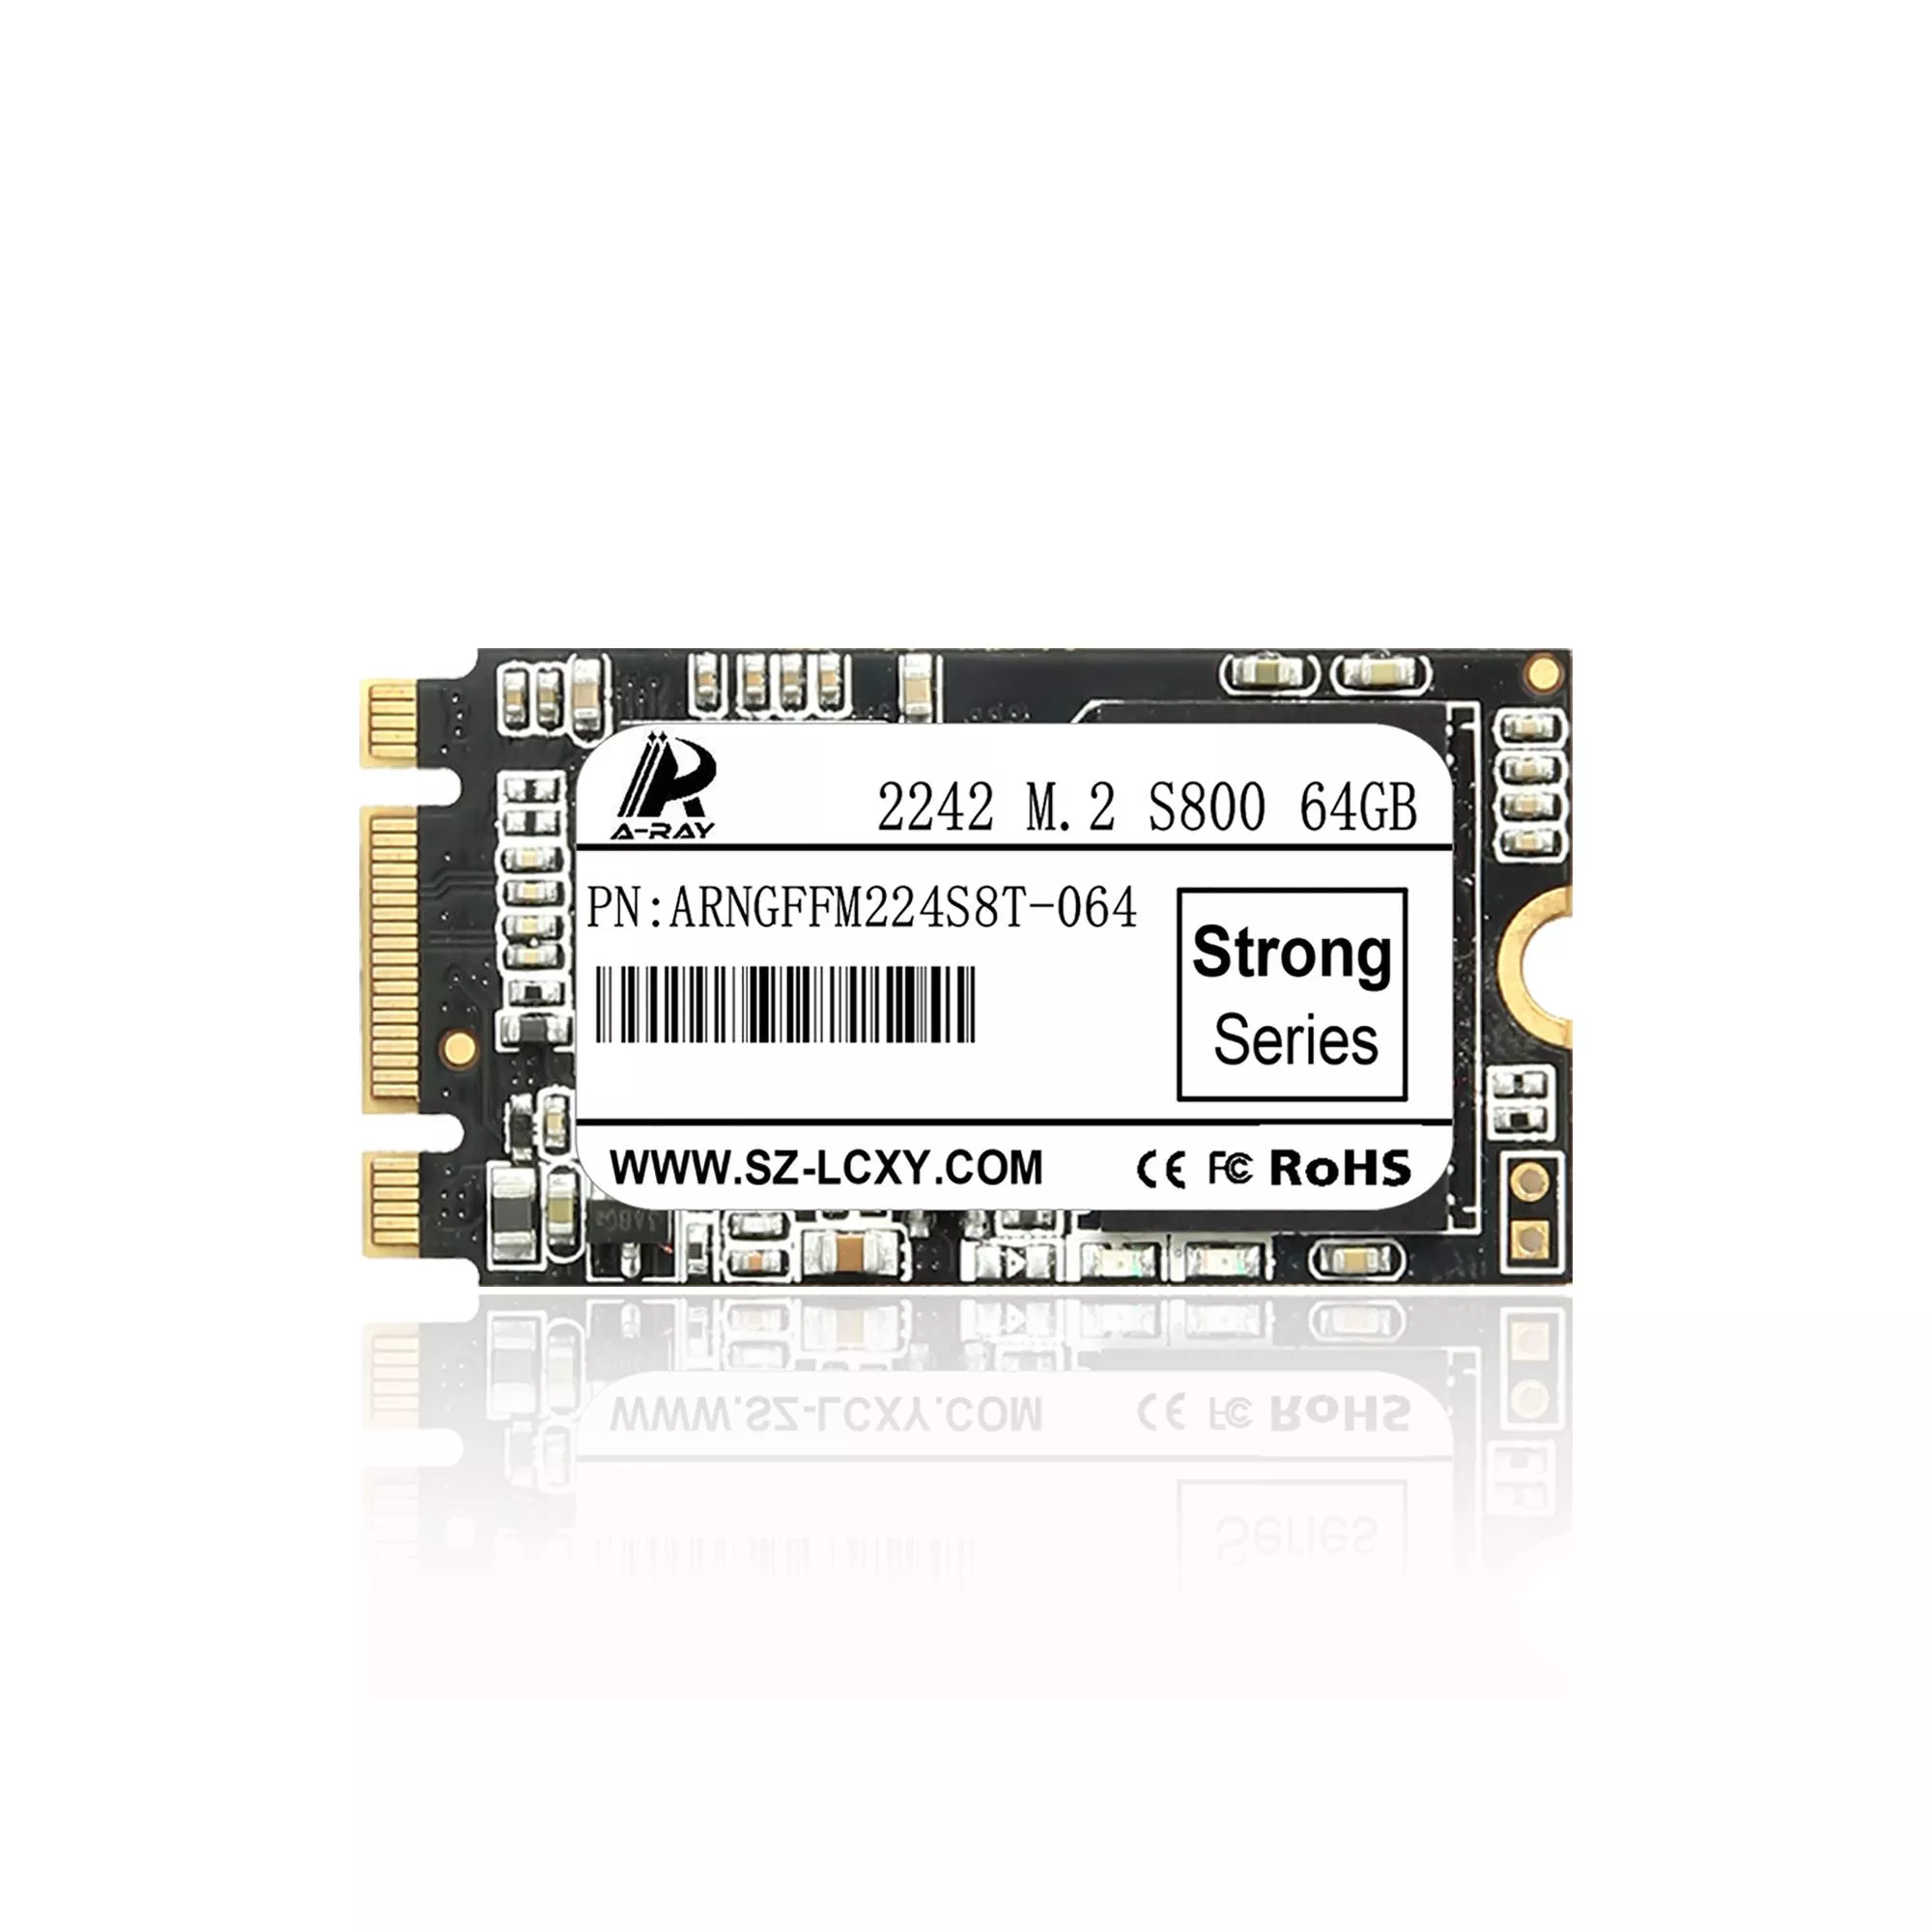 Ổ cứng SSD 64GB A-RAY 2242 NGFF M.2 6GBps S800 Strong Series